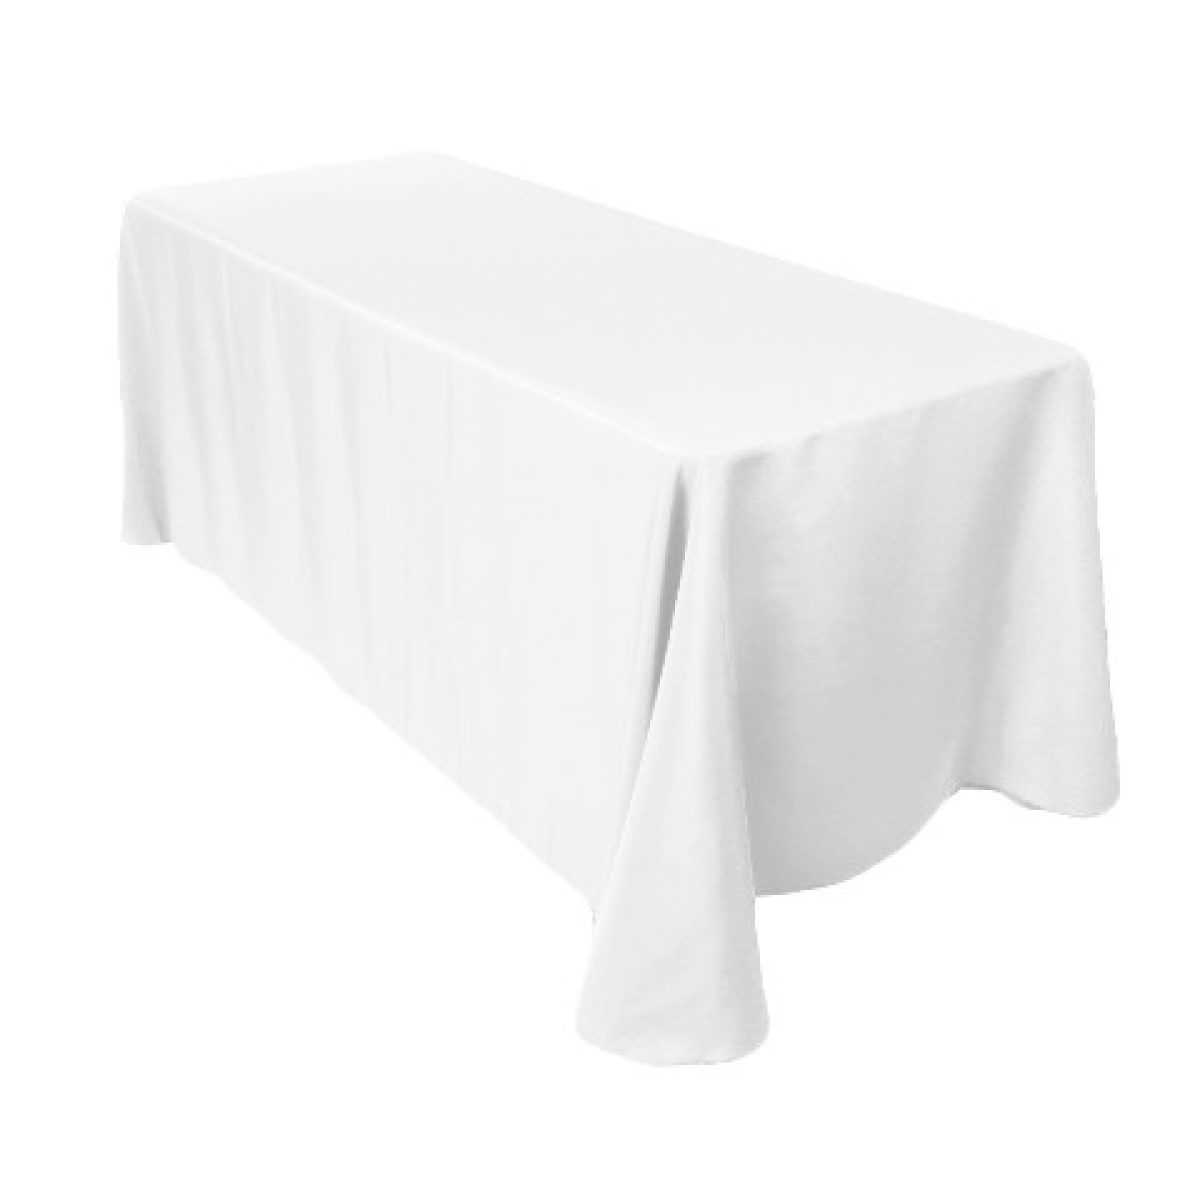 6′ Table Drape (90″ x 132″ Linen fits 6′ table to floor)